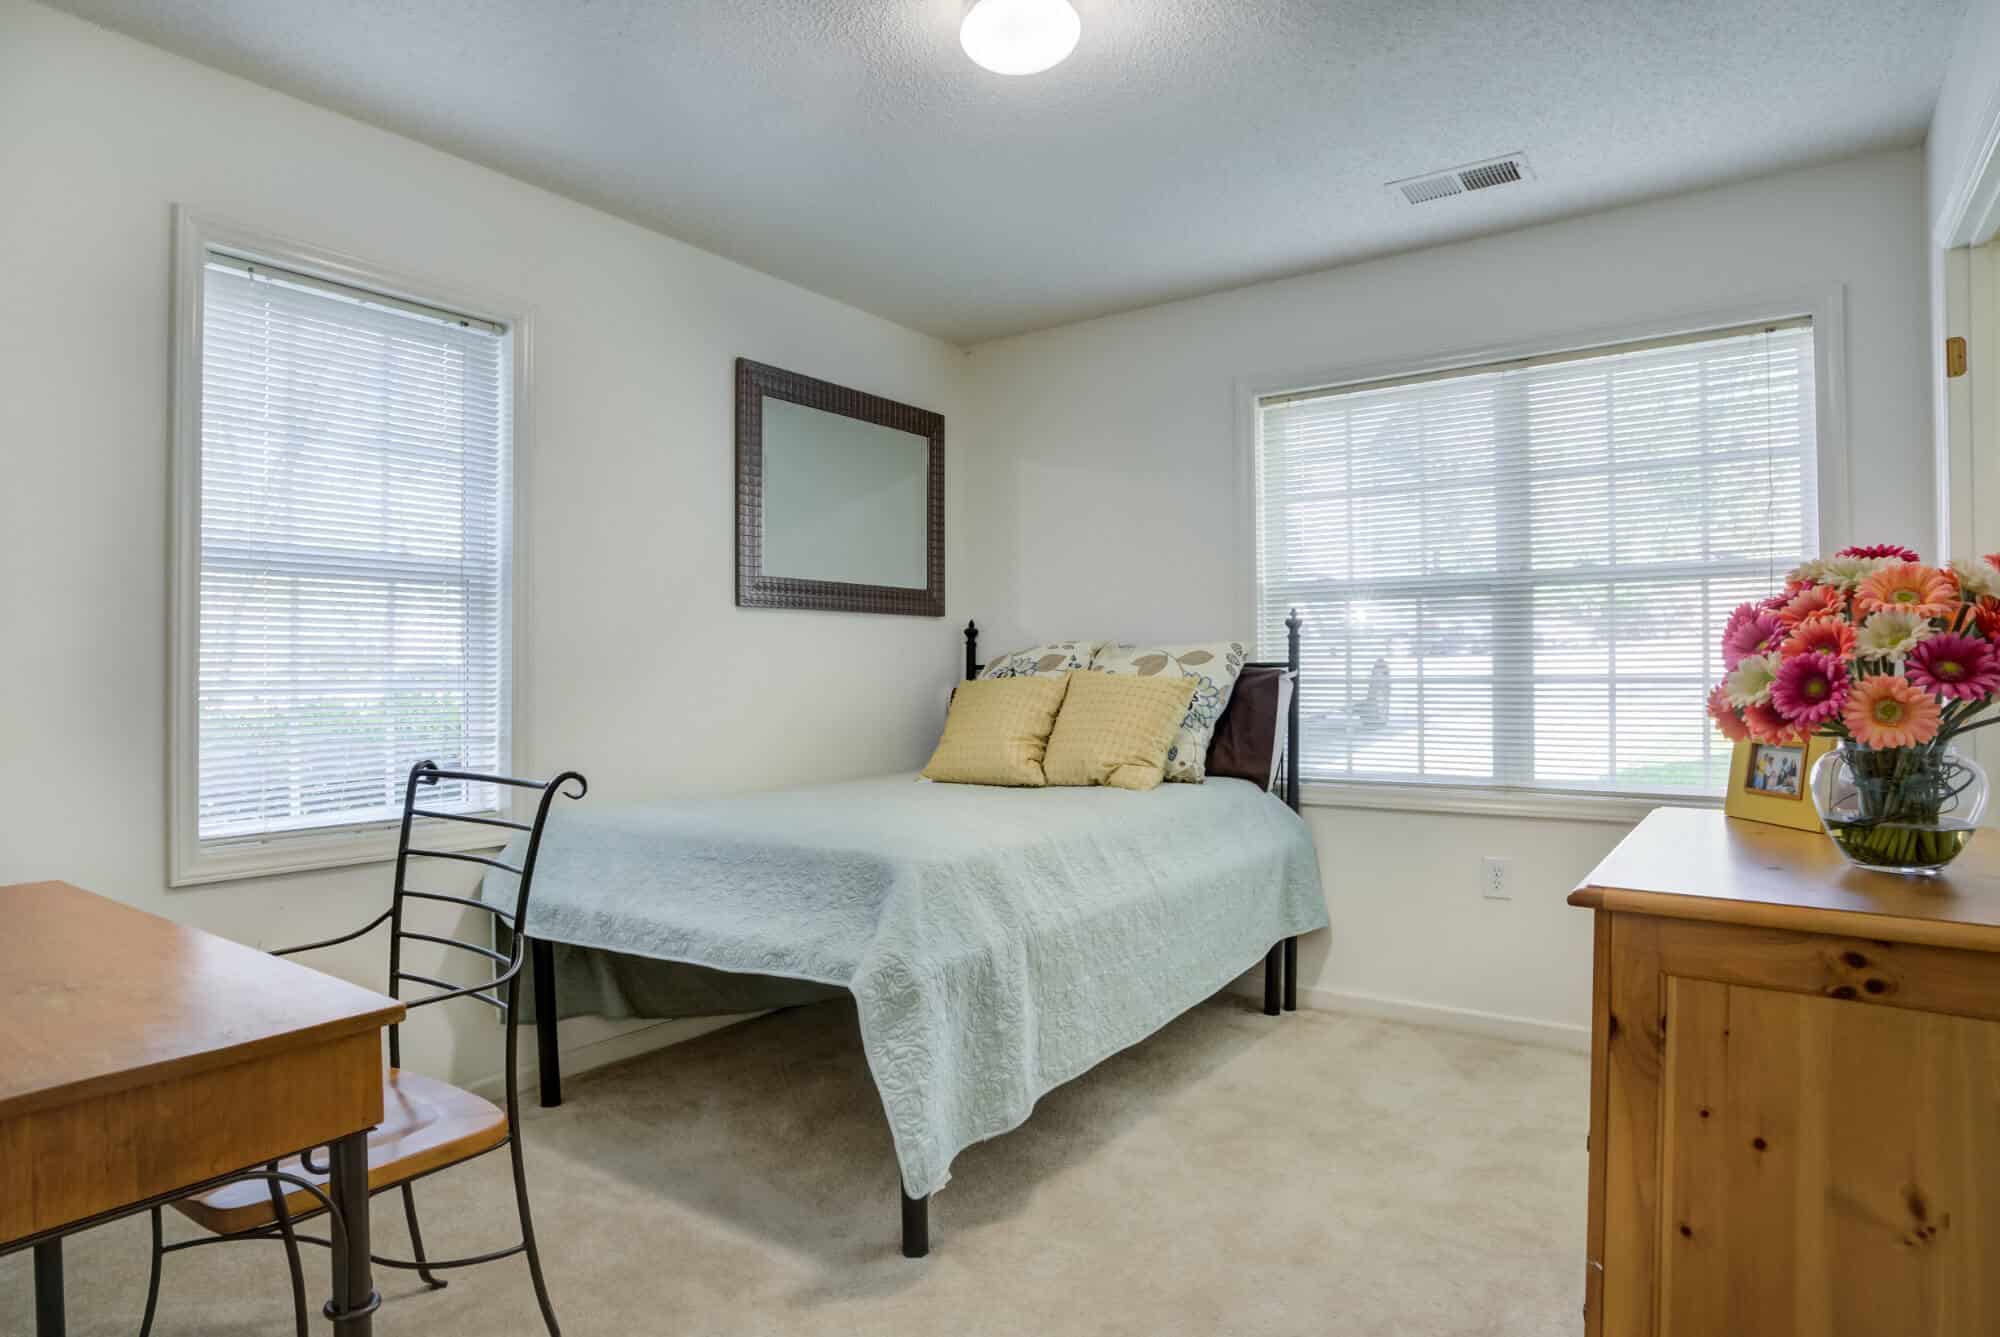 raleigh off campus university woods apartments off campus apartments near nc state university dining private bedroom